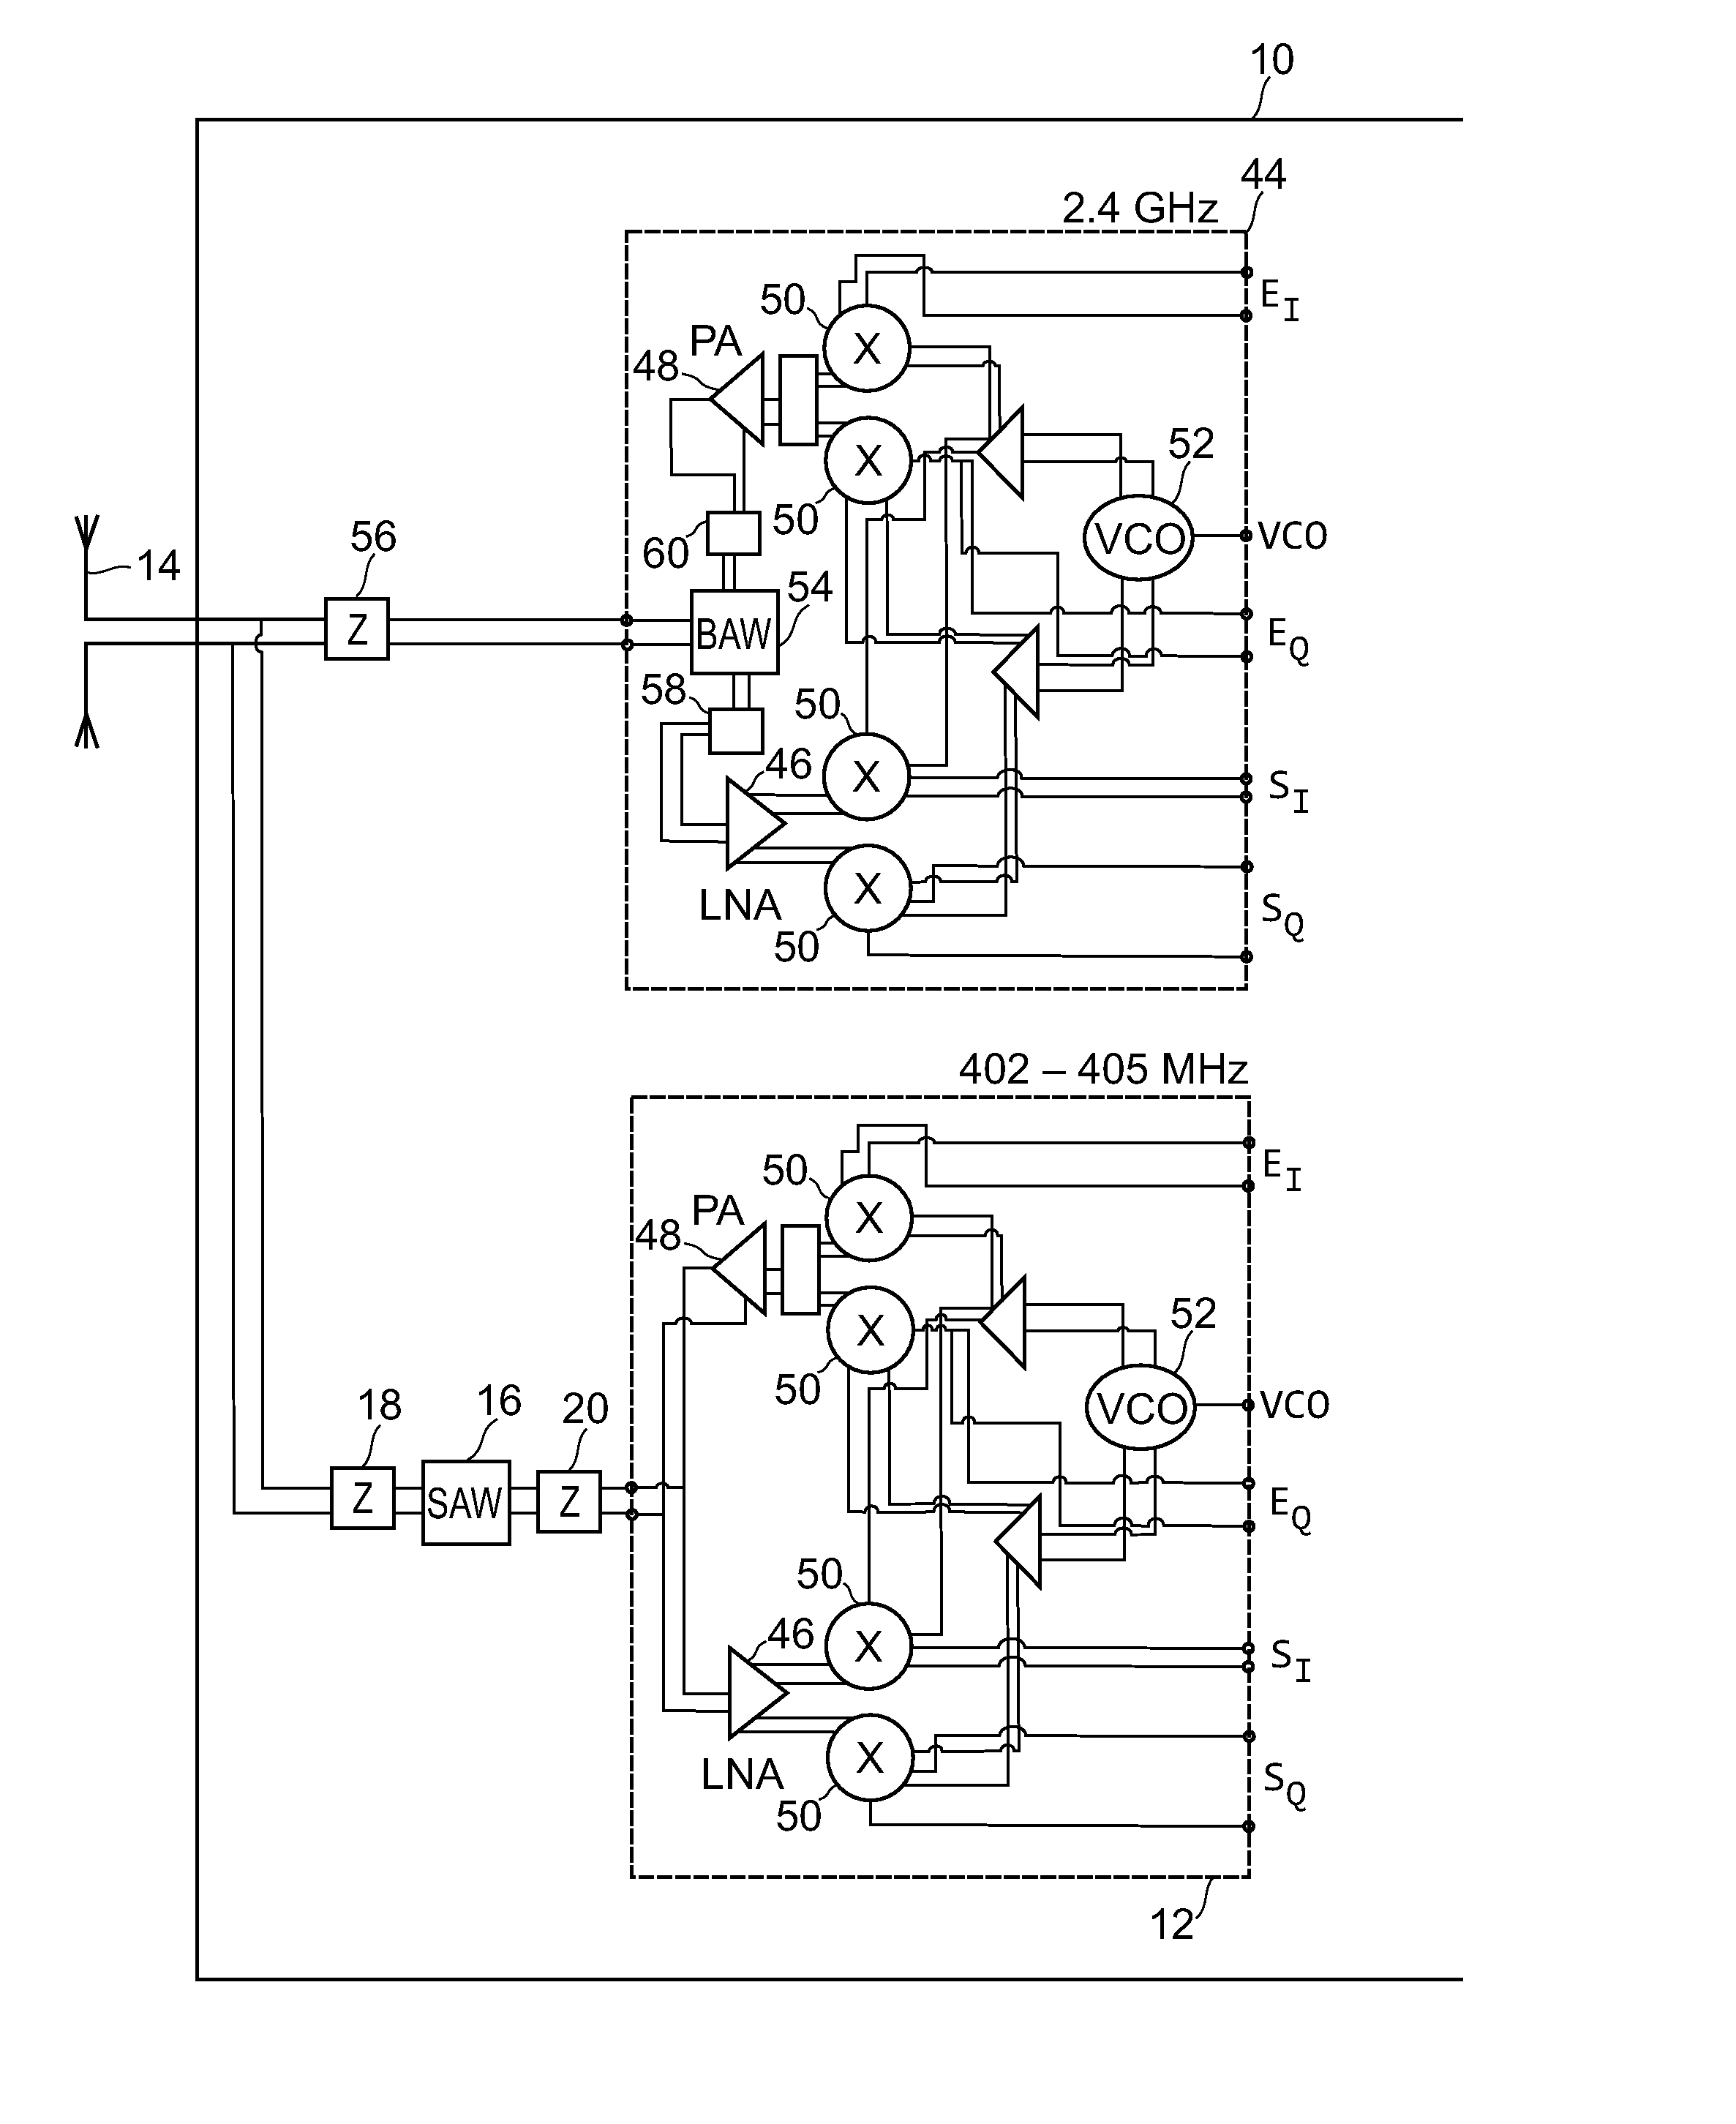 RF telemetry for an active medical device such as an implant or programmer for an implant